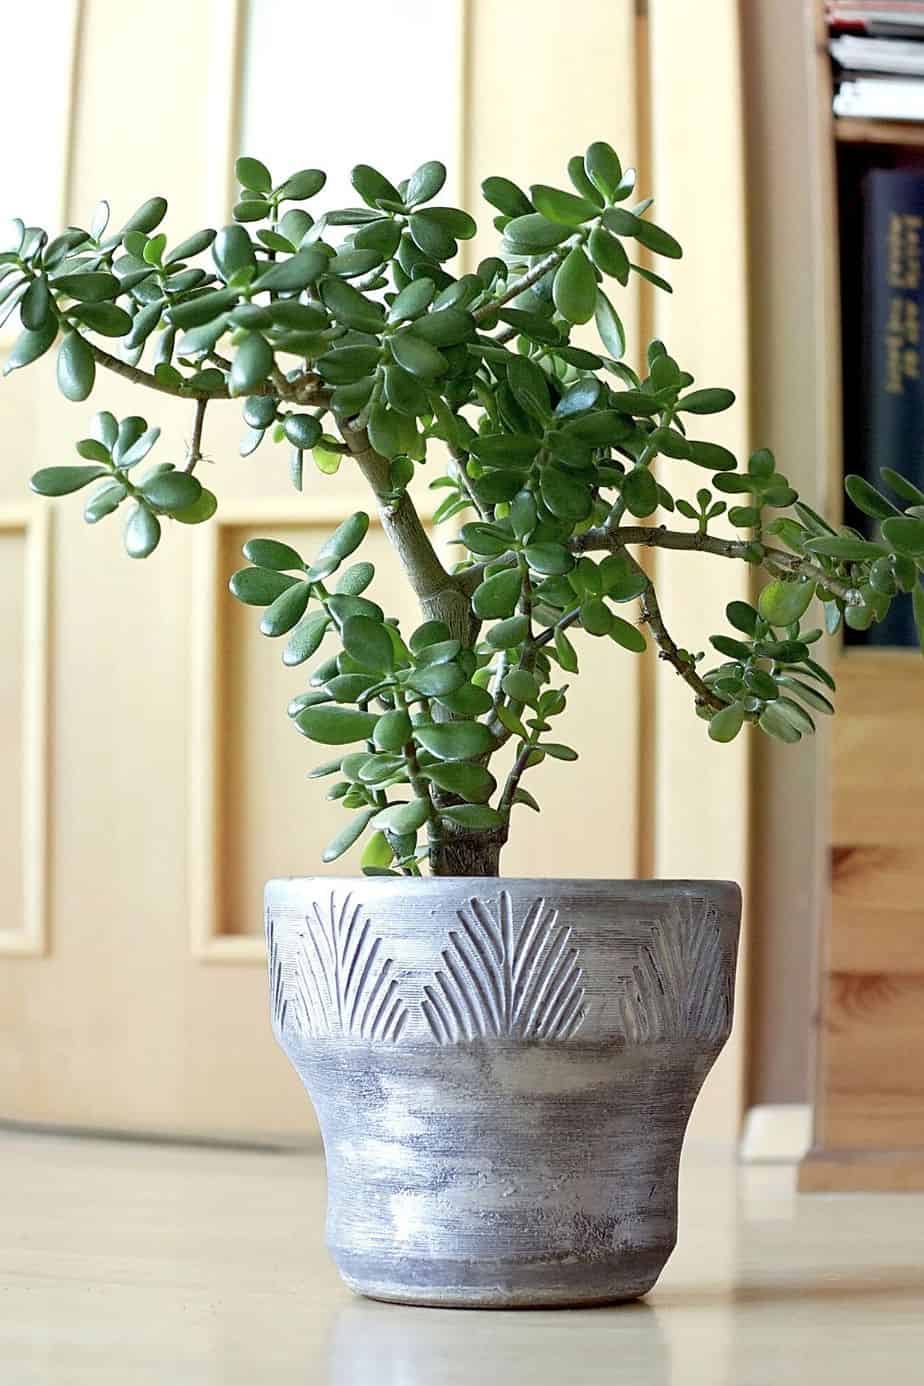 Jade Plant is a resilient and sun-loving plant that you can grow near your southwest-facing window